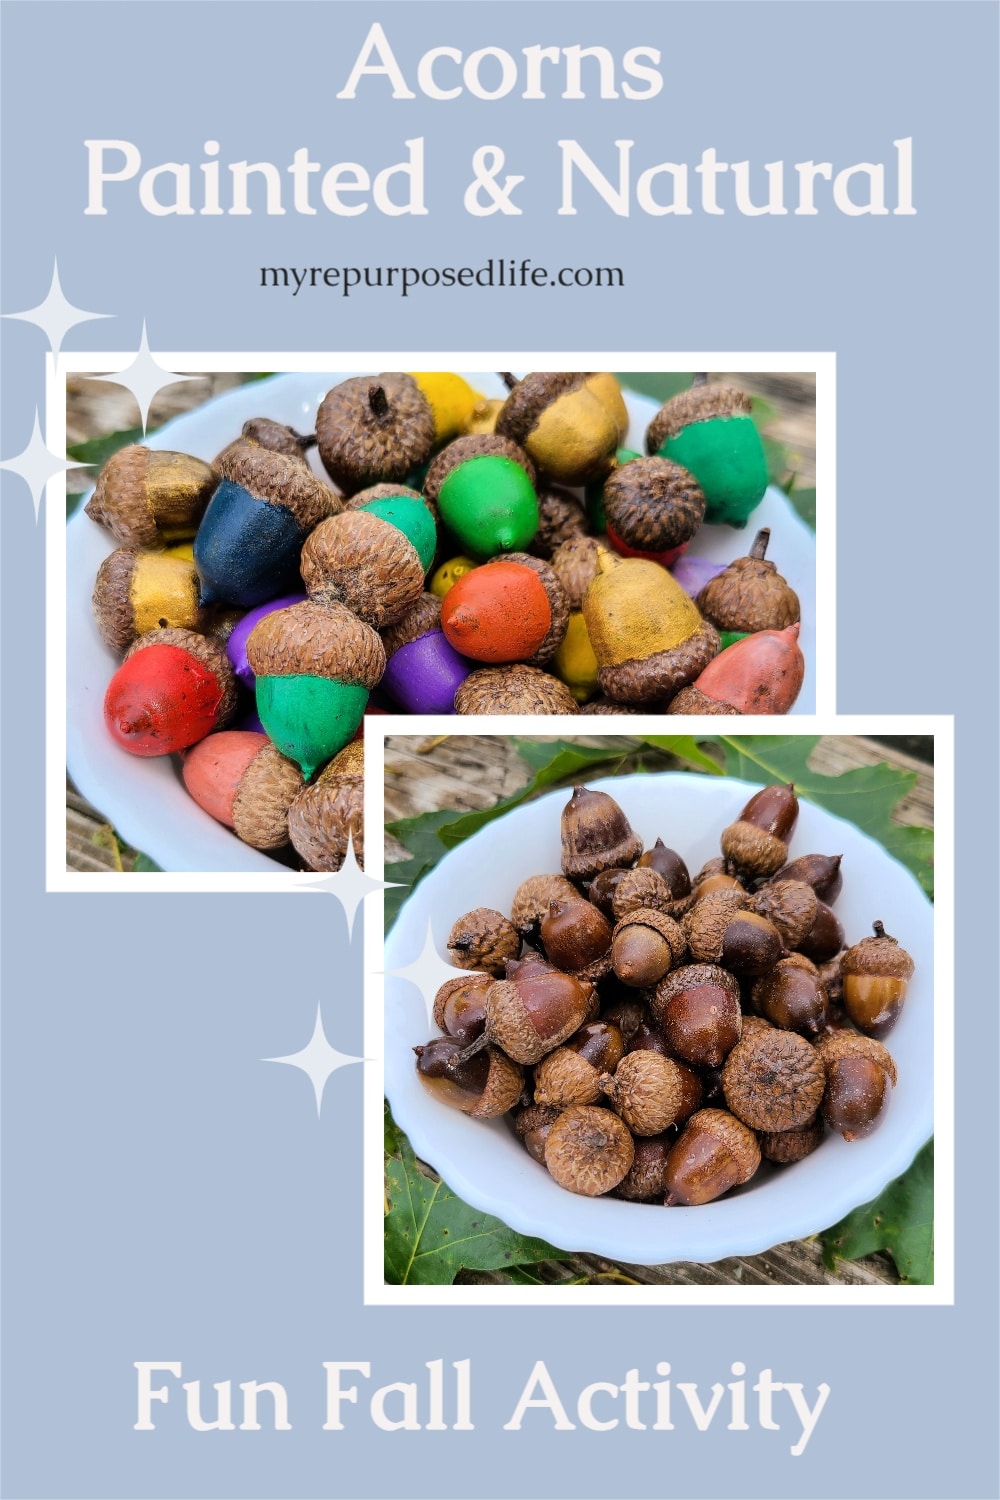 Have you ever seen painted acorns? I'm going to show you how to prep and paint acorns from your yard. Step by step details on drying, baking, painting and sealing. A great Fall decor project. #MyRepurposedLife #repurposed #acorns #fall #decor via @repurposedlife